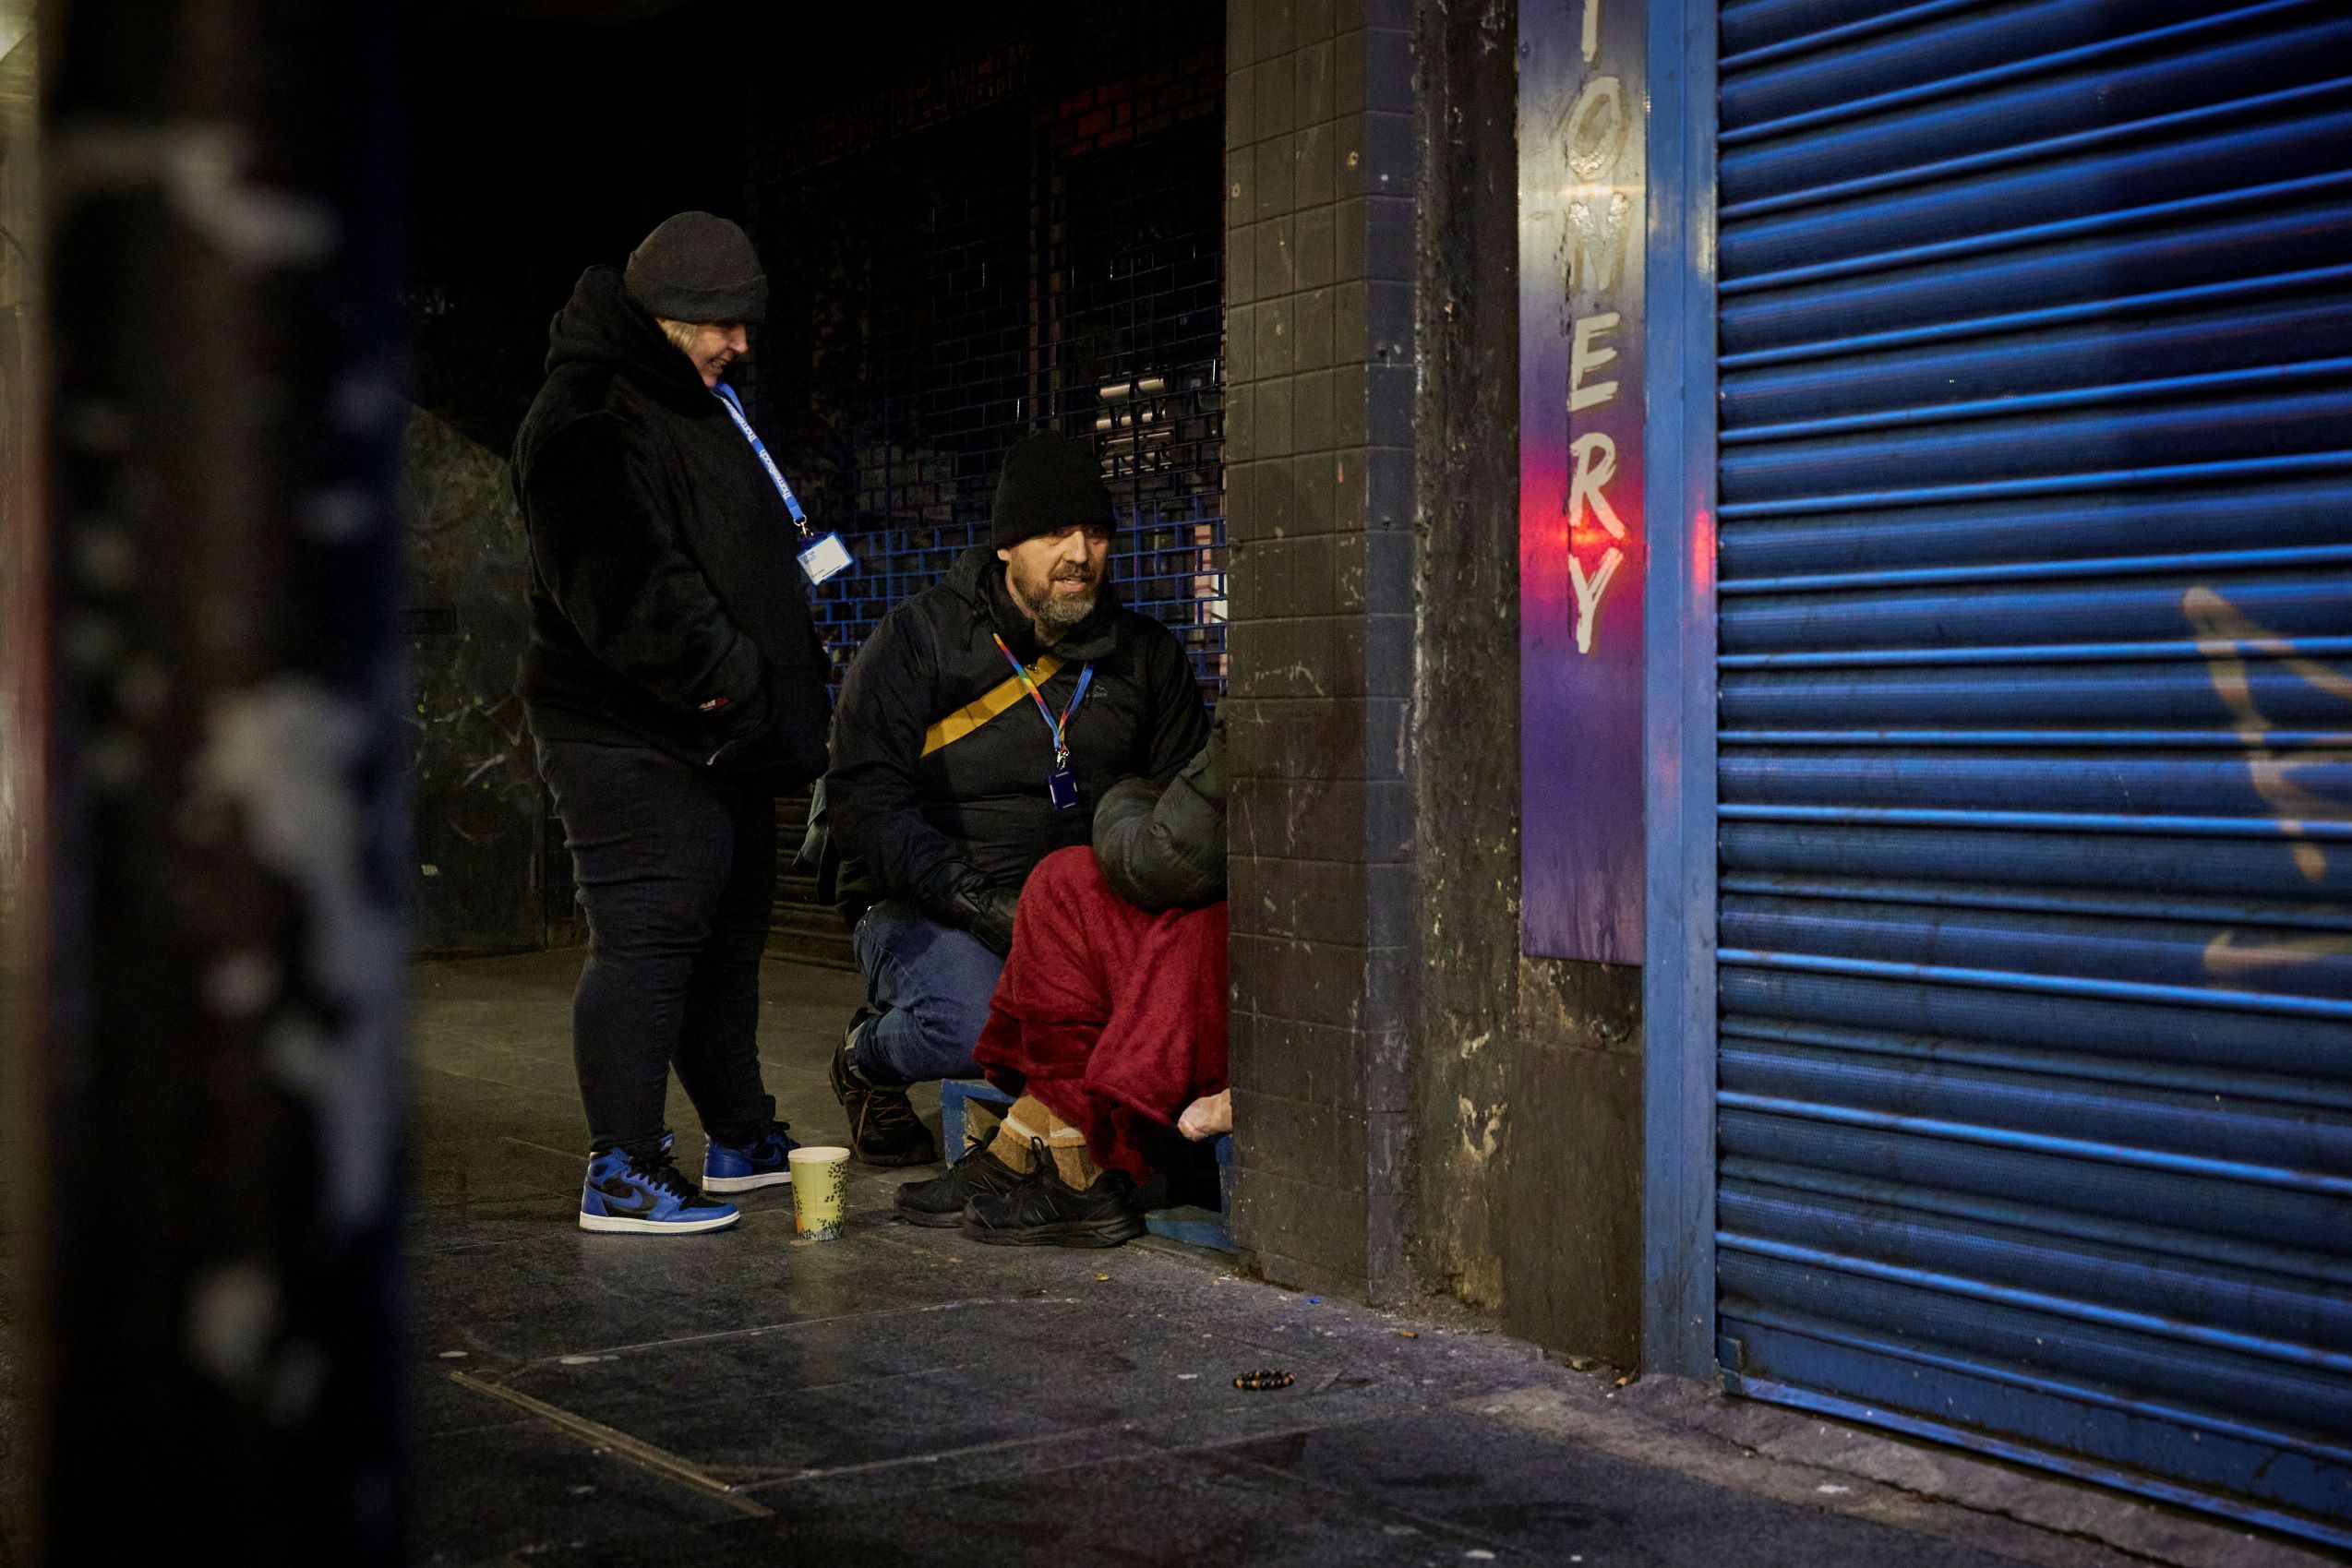 City of London outreach team helping person sleeping rough 